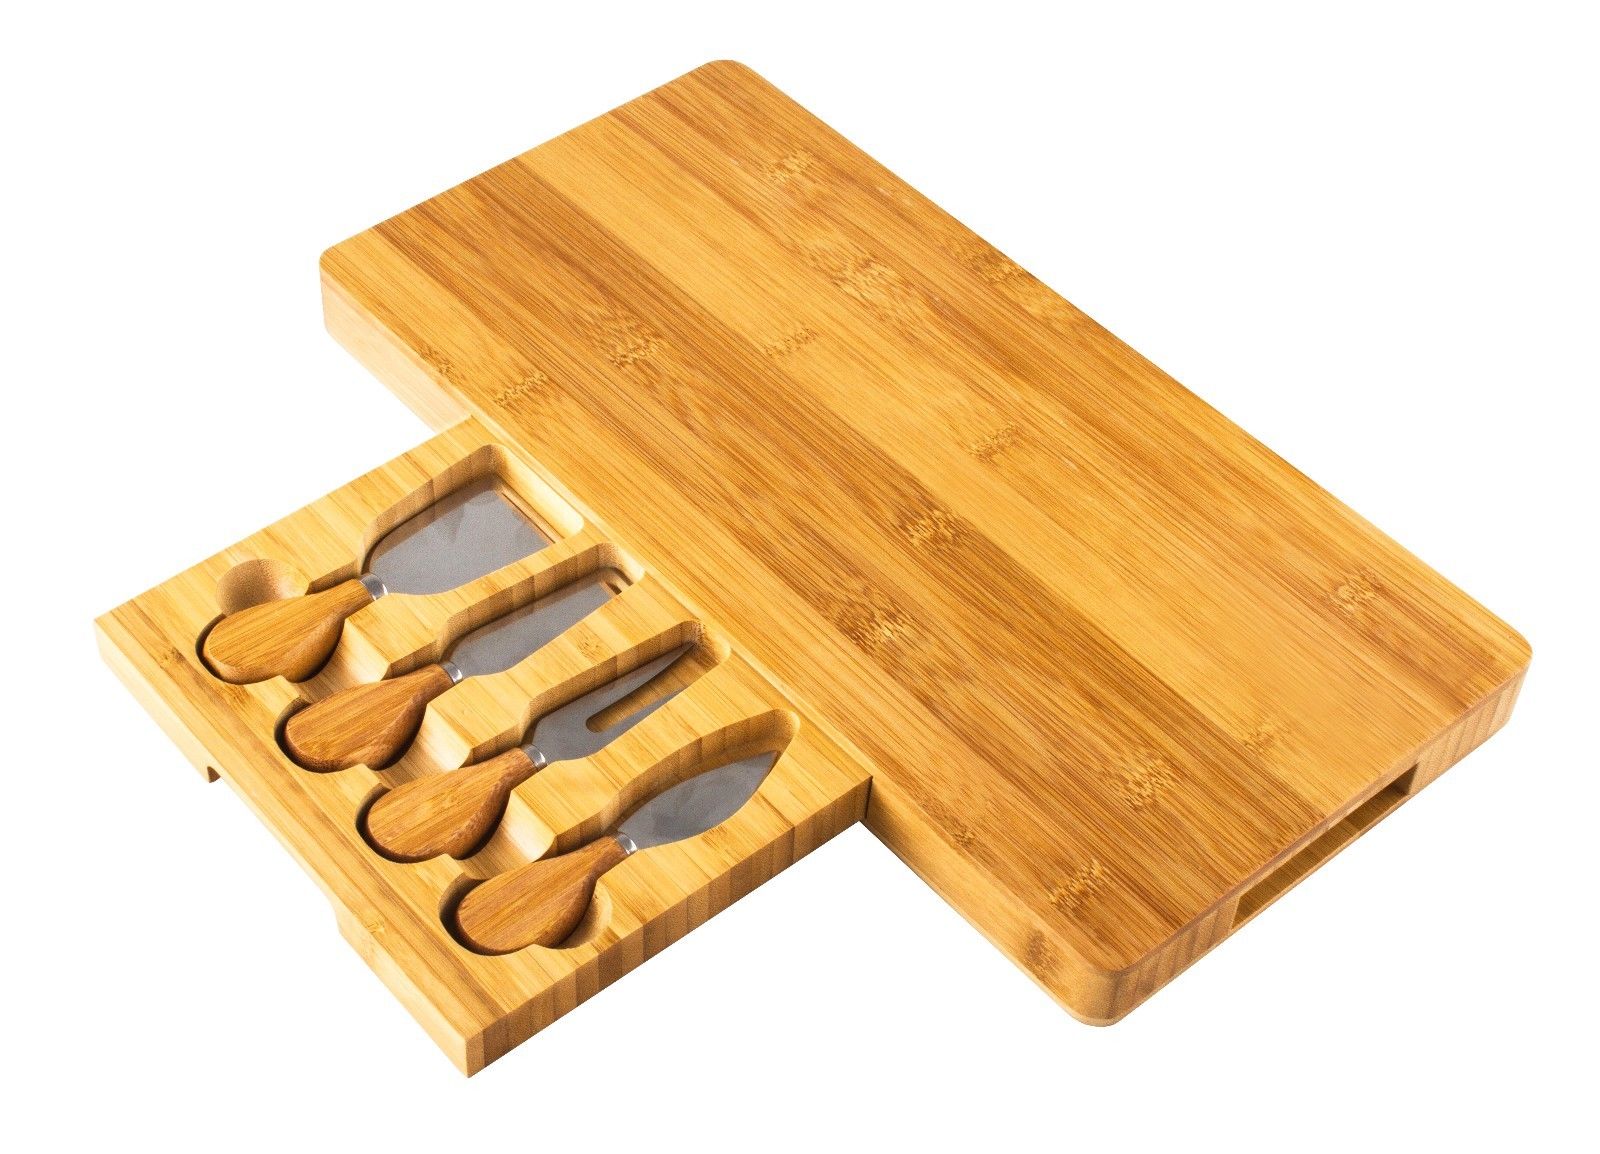 Bamboo Rectangle 16" X 8" Cheese Board & Cutlery Set With Slide Out Drawer